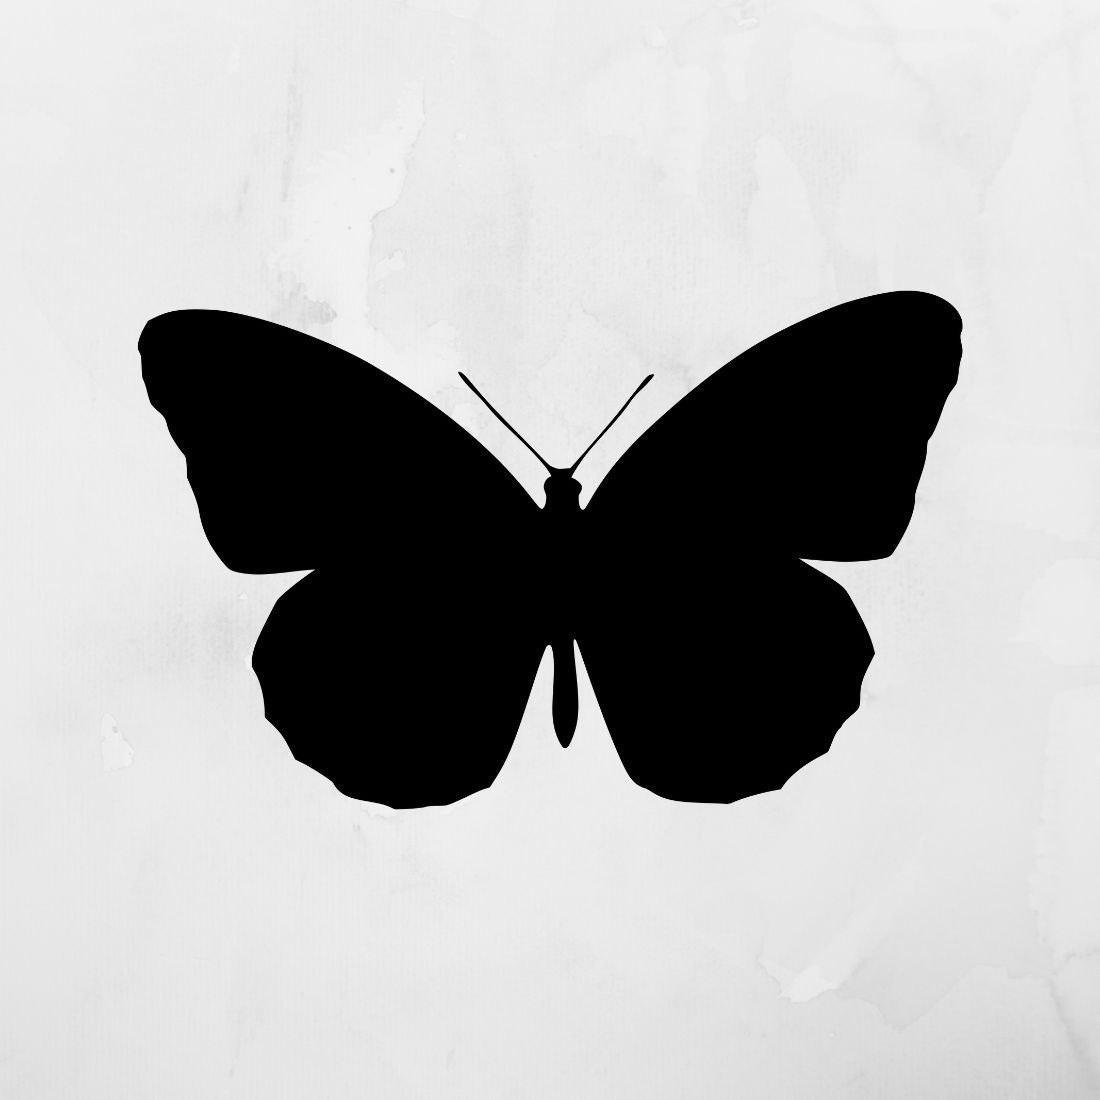 Butterfly svg, Floral butterfly svg, Butterfly silhouette By